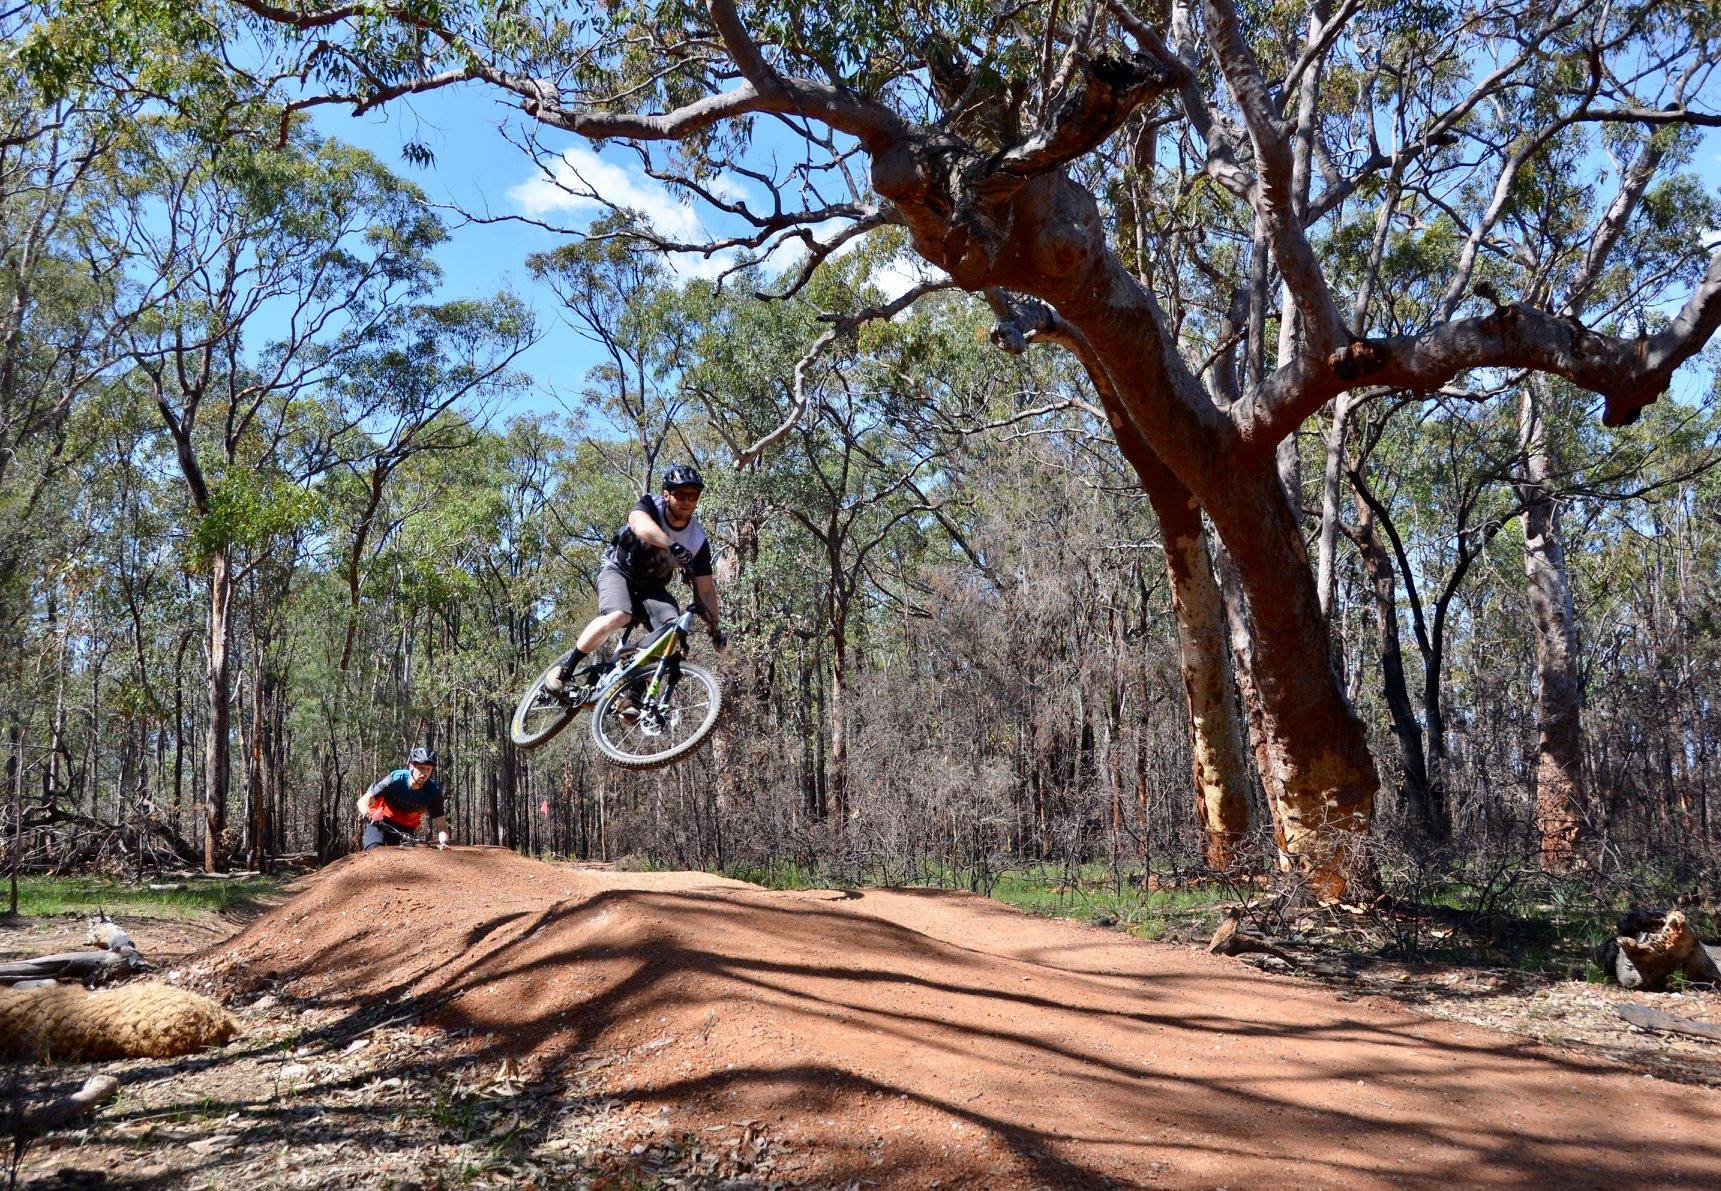 Bike rider going over a jump in bush surrounds